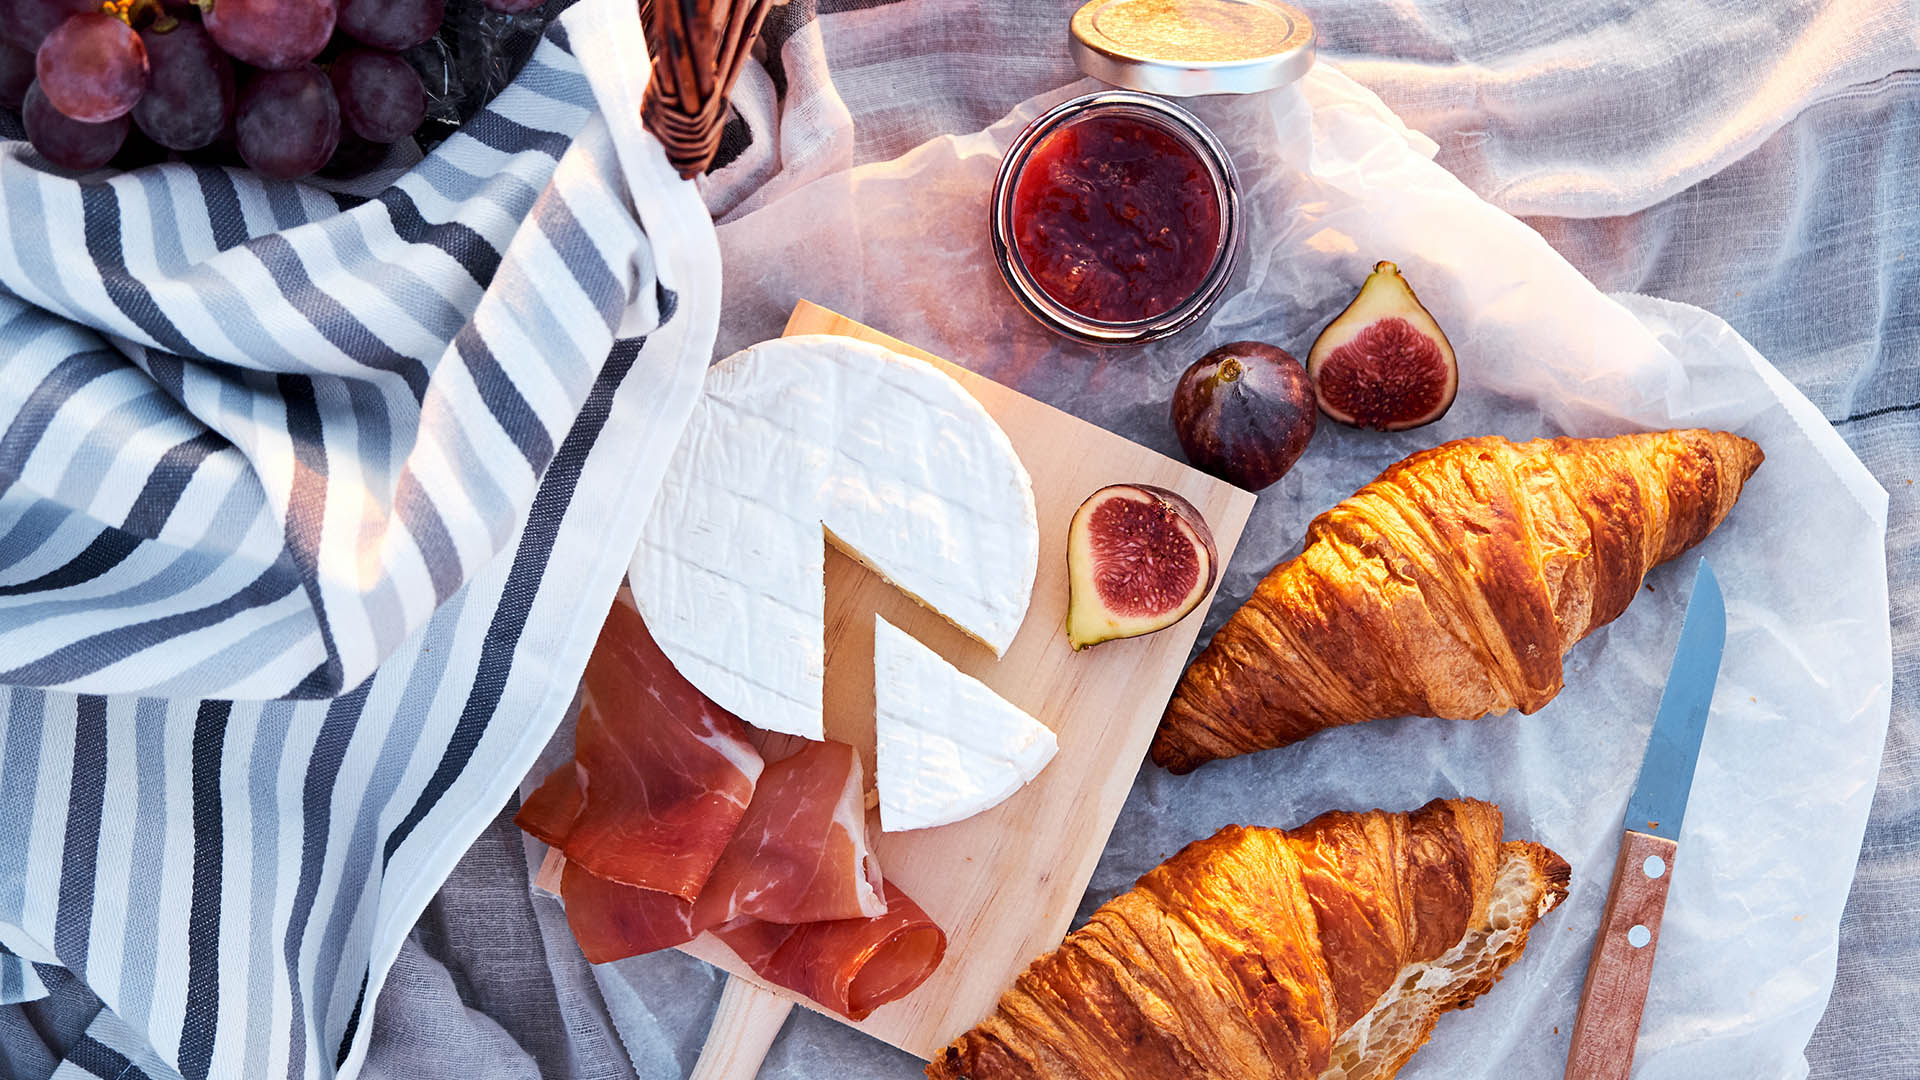 A white picnic blanket on the ground with a brown wicker picnic basket with bread, grapes and wine glasses inside. To the right there is a wheel of Brie and some croissants on a cutting board